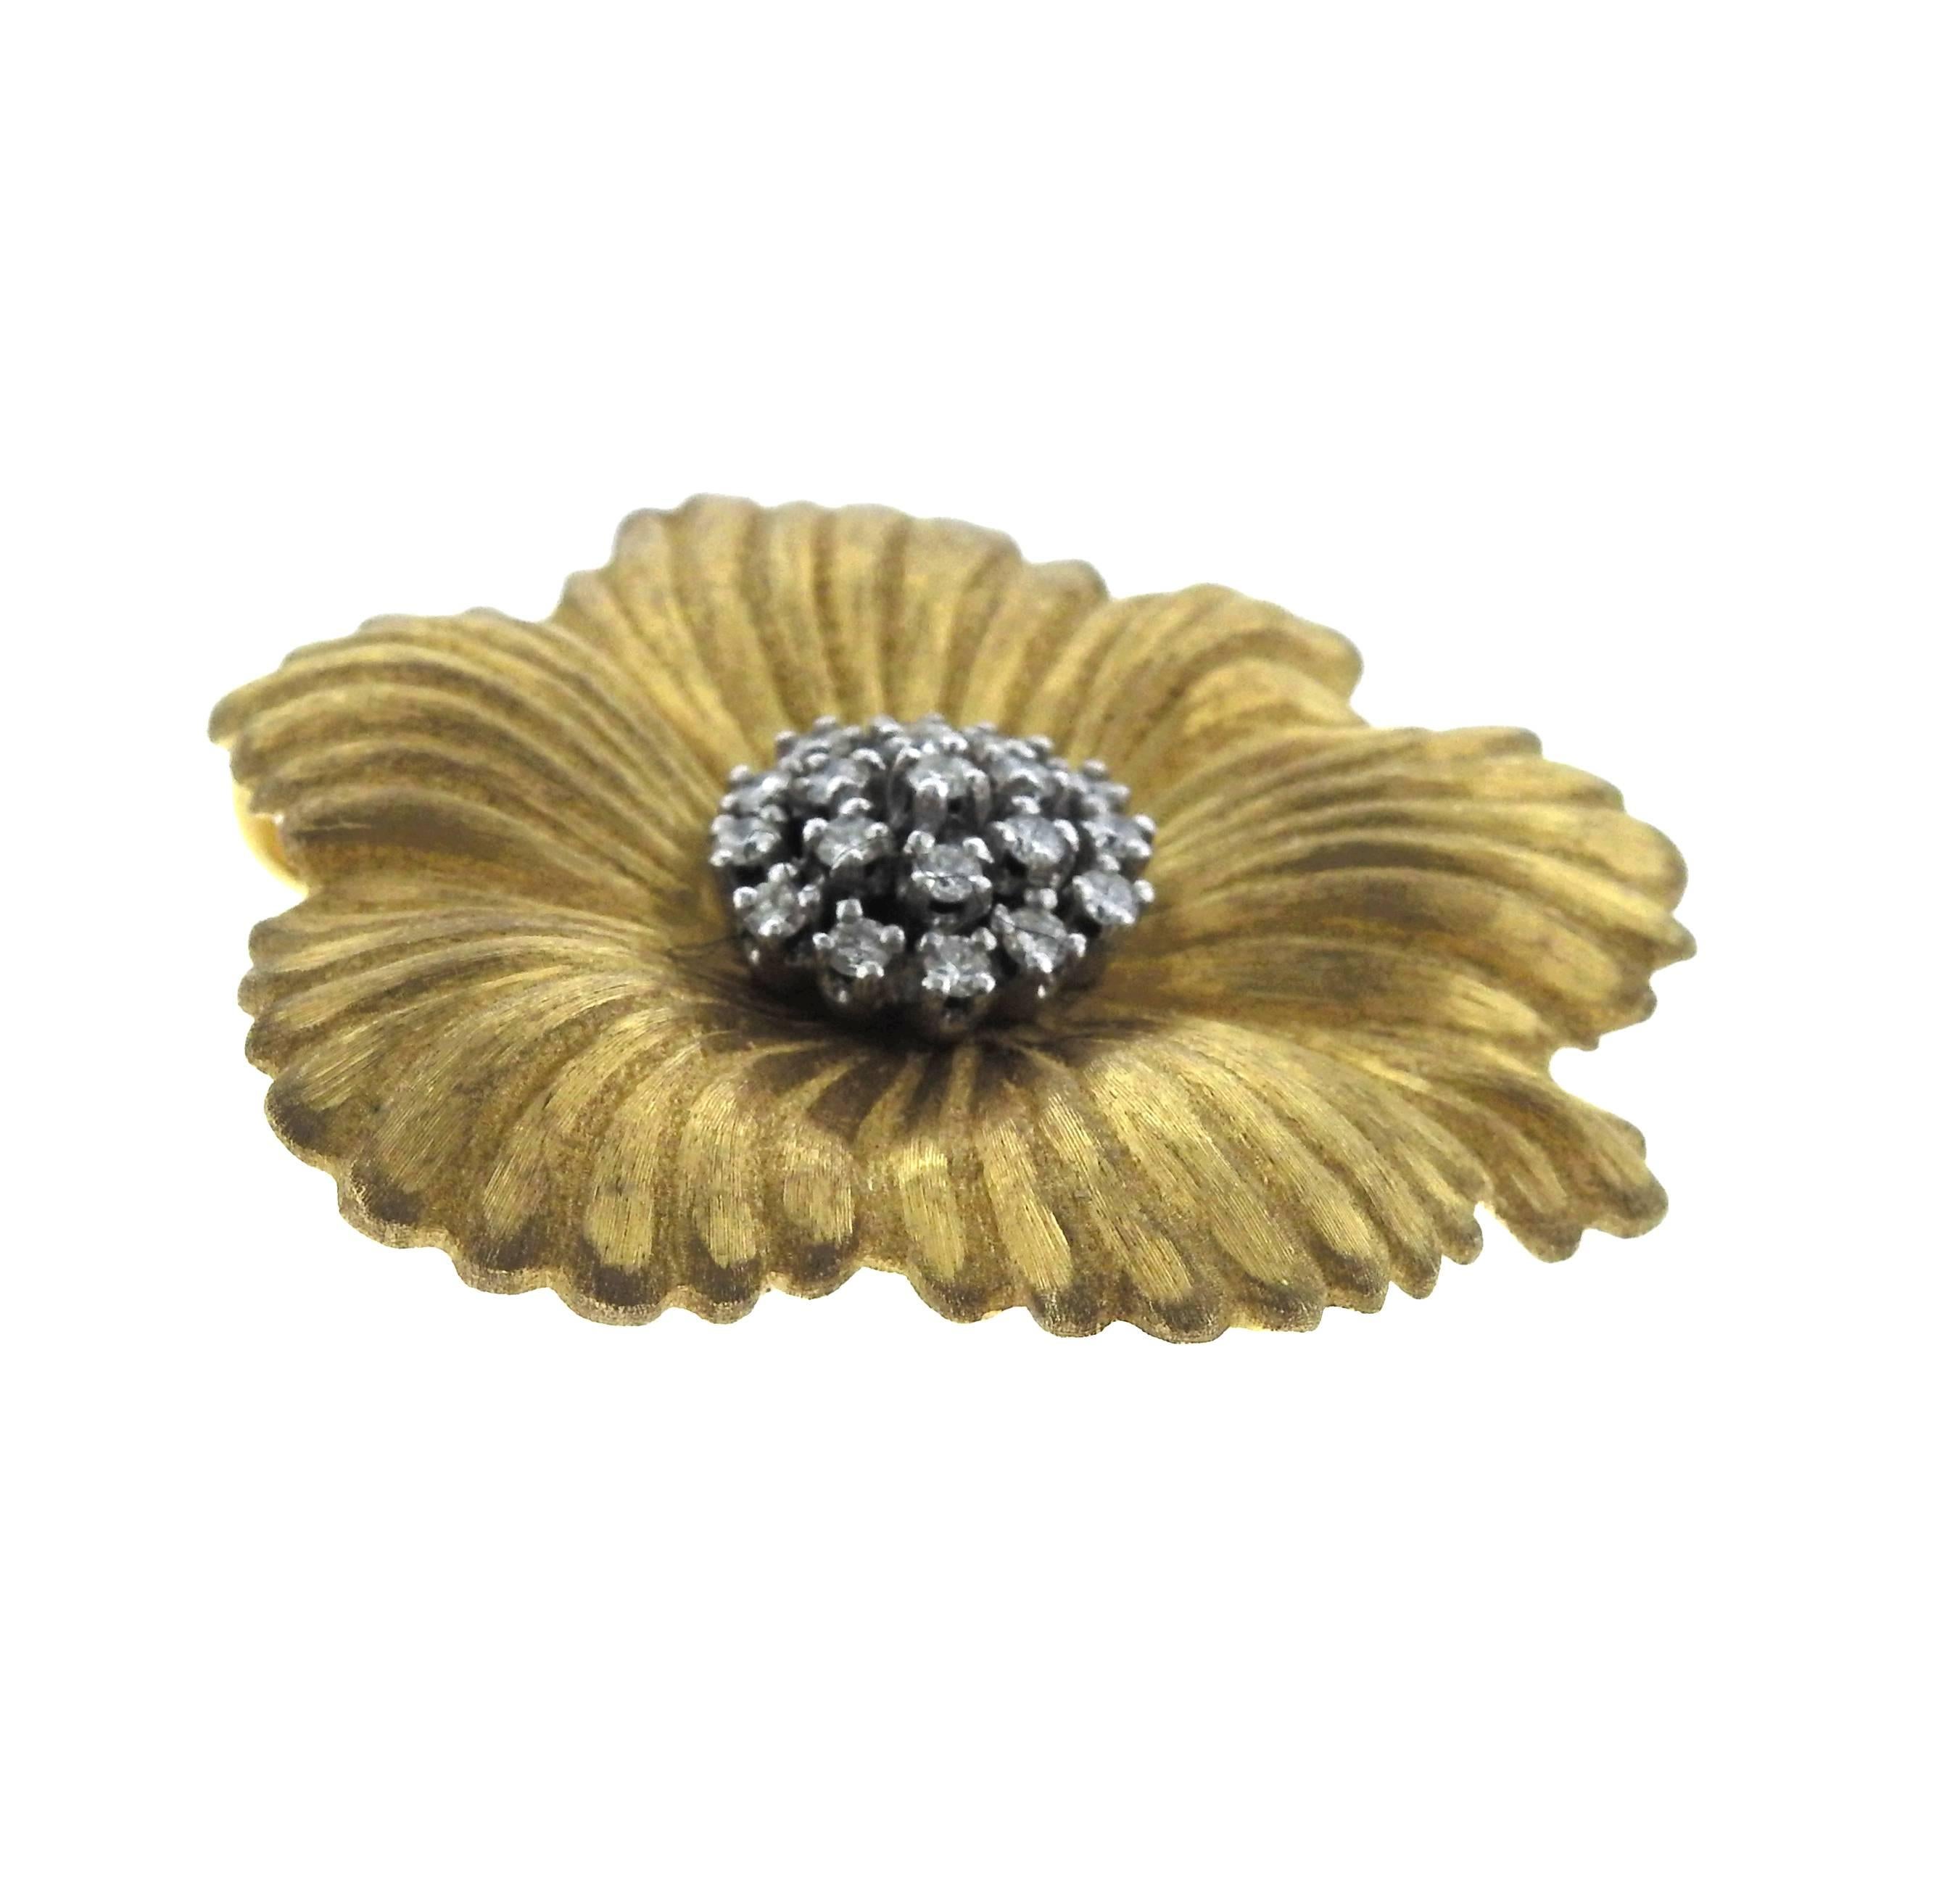 18k yellow gold large flower brooch pendant brooch, crafted by Buccellati, decorated with approx. 0.57ctw in H/VS diamonds. Brooch is 38mm x 42mm, weighs 18.3 grams. Marked: Buccellati, Italy,18k, X3911.